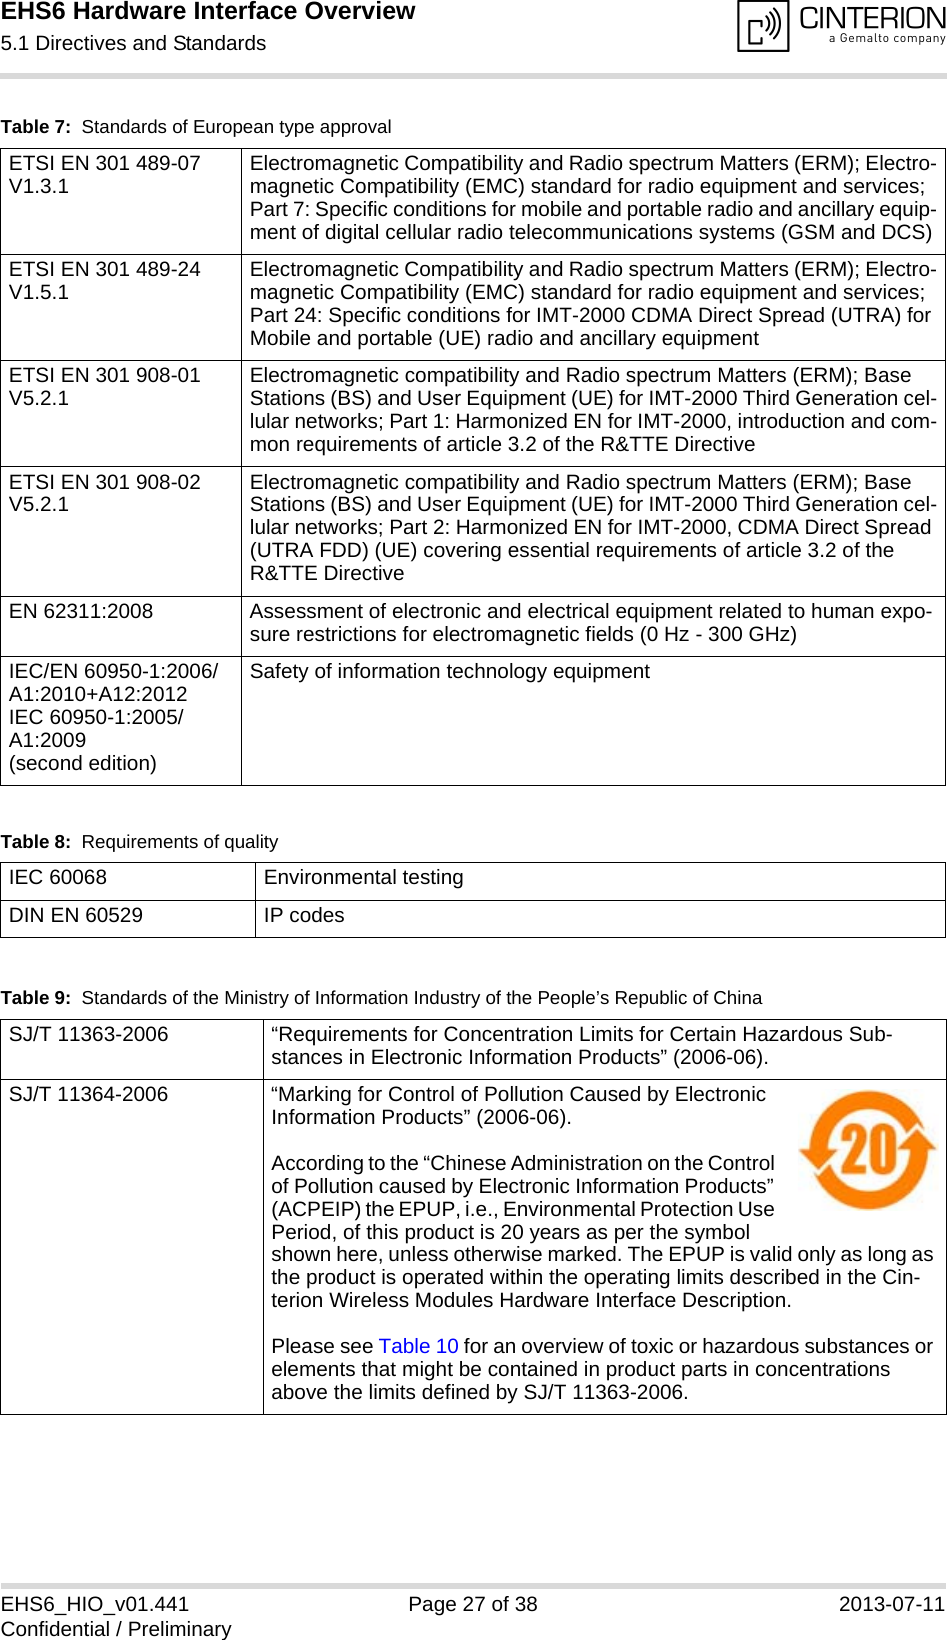 EHS6 Hardware Interface Overview5.1 Directives and Standards31EHS6_HIO_v01.441 Page 27 of 38 2013-07-11Confidential / PreliminaryETSI EN 301 489-07 V1.3.1 Electromagnetic Compatibility and Radio spectrum Matters (ERM); Electro-magnetic Compatibility (EMC) standard for radio equipment and services; Part 7: Specific conditions for mobile and portable radio and ancillary equip-ment of digital cellular radio telecommunications systems (GSM and DCS)ETSI EN 301 489-24 V1.5.1 Electromagnetic Compatibility and Radio spectrum Matters (ERM); Electro-magnetic Compatibility (EMC) standard for radio equipment and services; Part 24: Specific conditions for IMT-2000 CDMA Direct Spread (UTRA) for Mobile and portable (UE) radio and ancillary equipmentETSI EN 301 908-01 V5.2.1 Electromagnetic compatibility and Radio spectrum Matters (ERM); Base Stations (BS) and User Equipment (UE) for IMT-2000 Third Generation cel-lular networks; Part 1: Harmonized EN for IMT-2000, introduction and com-mon requirements of article 3.2 of the R&amp;TTE DirectiveETSI EN 301 908-02 V5.2.1 Electromagnetic compatibility and Radio spectrum Matters (ERM); Base Stations (BS) and User Equipment (UE) for IMT-2000 Third Generation cel-lular networks; Part 2: Harmonized EN for IMT-2000, CDMA Direct Spread (UTRA FDD) (UE) covering essential requirements of article 3.2 of the R&amp;TTE DirectiveEN 62311:2008 Assessment of electronic and electrical equipment related to human expo-sure restrictions for electromagnetic fields (0 Hz - 300 GHz)IEC/EN 60950-1:2006/A1:2010+A12:2012IEC 60950-1:2005/A1:2009(second edition)Safety of information technology equipmentTable 8:  Requirements of qualityIEC 60068 Environmental testingDIN EN 60529 IP codesTable 9:  Standards of the Ministry of Information Industry of the People’s Republic of ChinaSJ/T 11363-2006  “Requirements for Concentration Limits for Certain Hazardous Sub-stances in Electronic Information Products” (2006-06).SJ/T 11364-2006 “Marking for Control of Pollution Caused by Electronic Information Products” (2006-06).According to the “Chinese Administration on the Control of Pollution caused by Electronic Information Products” (ACPEIP) the EPUP, i.e., Environmental Protection Use Period, of this product is 20 years as per the symbol shown here, unless otherwise marked. The EPUP is valid only as long as the product is operated within the operating limits described in the Cin-terion Wireless Modules Hardware Interface Description.Please see Table 10 for an overview of toxic or hazardous substances or elements that might be contained in product parts in concentrations above the limits defined by SJ/T 11363-2006. Table 7:  Standards of European type approval